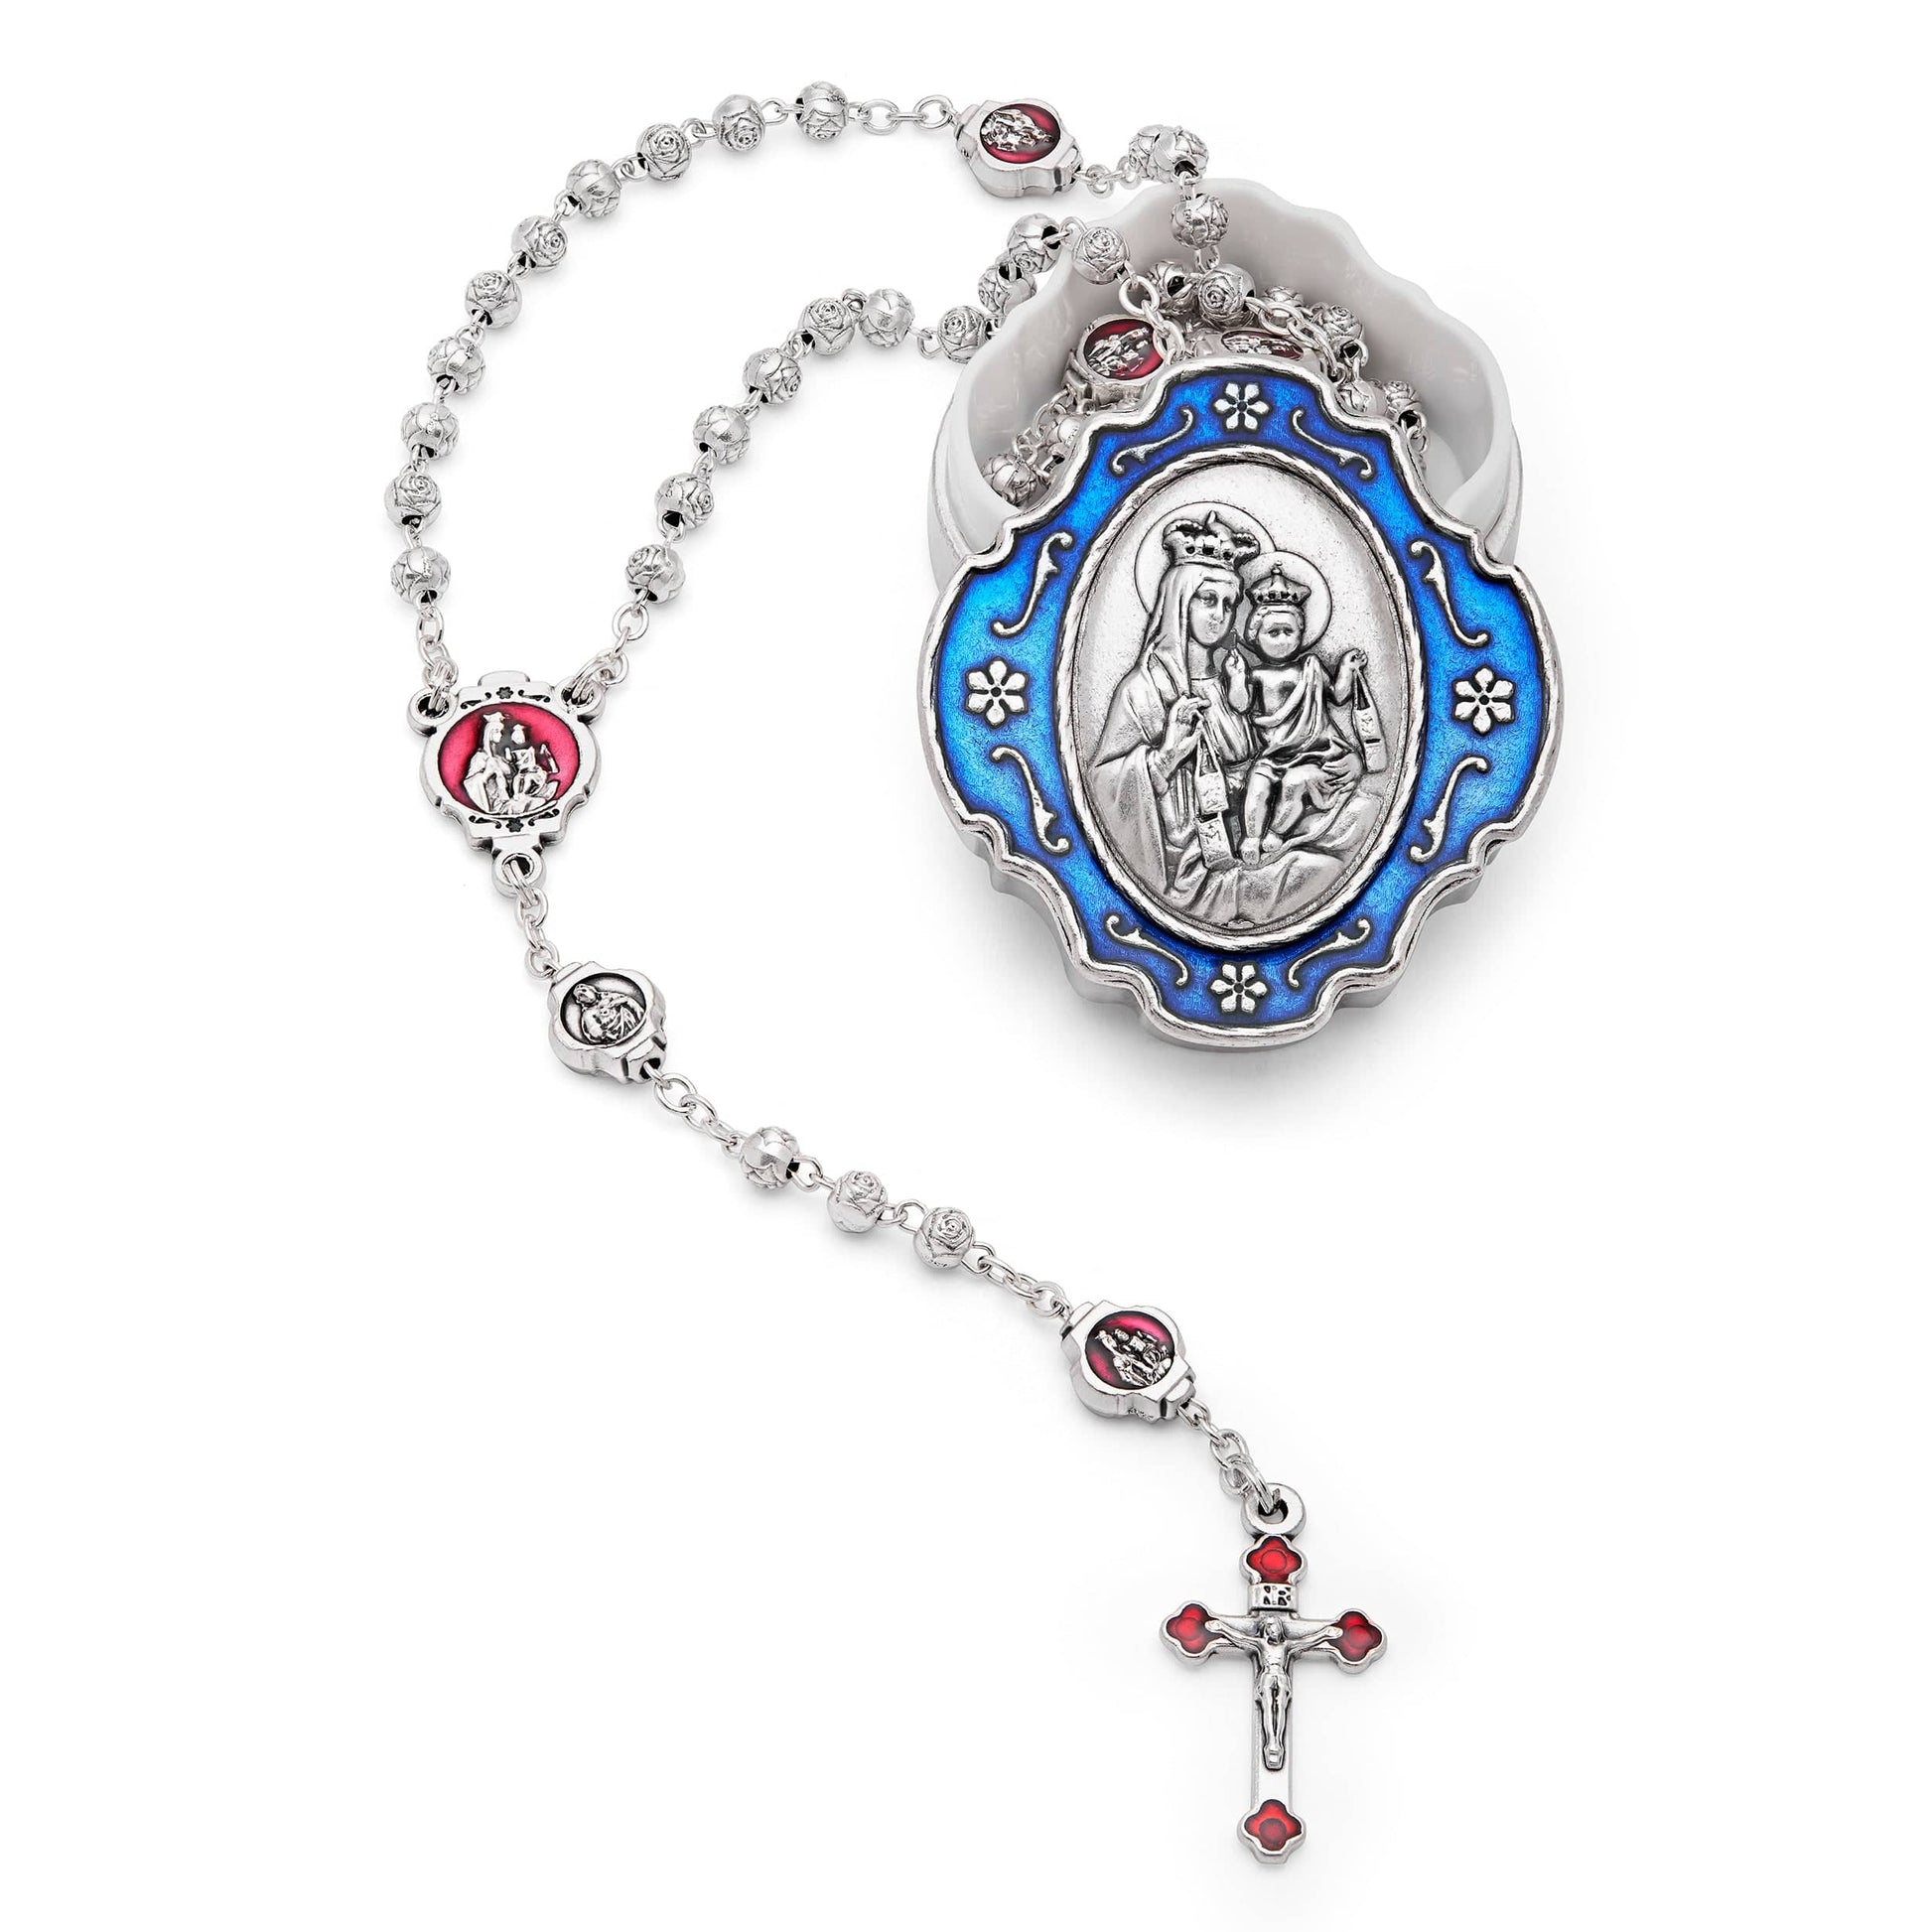 MONDO CATTOLICO Prayer Beads 34 cm (13.38 in) / 4 mm (0.15 in) Our Lady of Mount Carmel Metal Case and Rosary